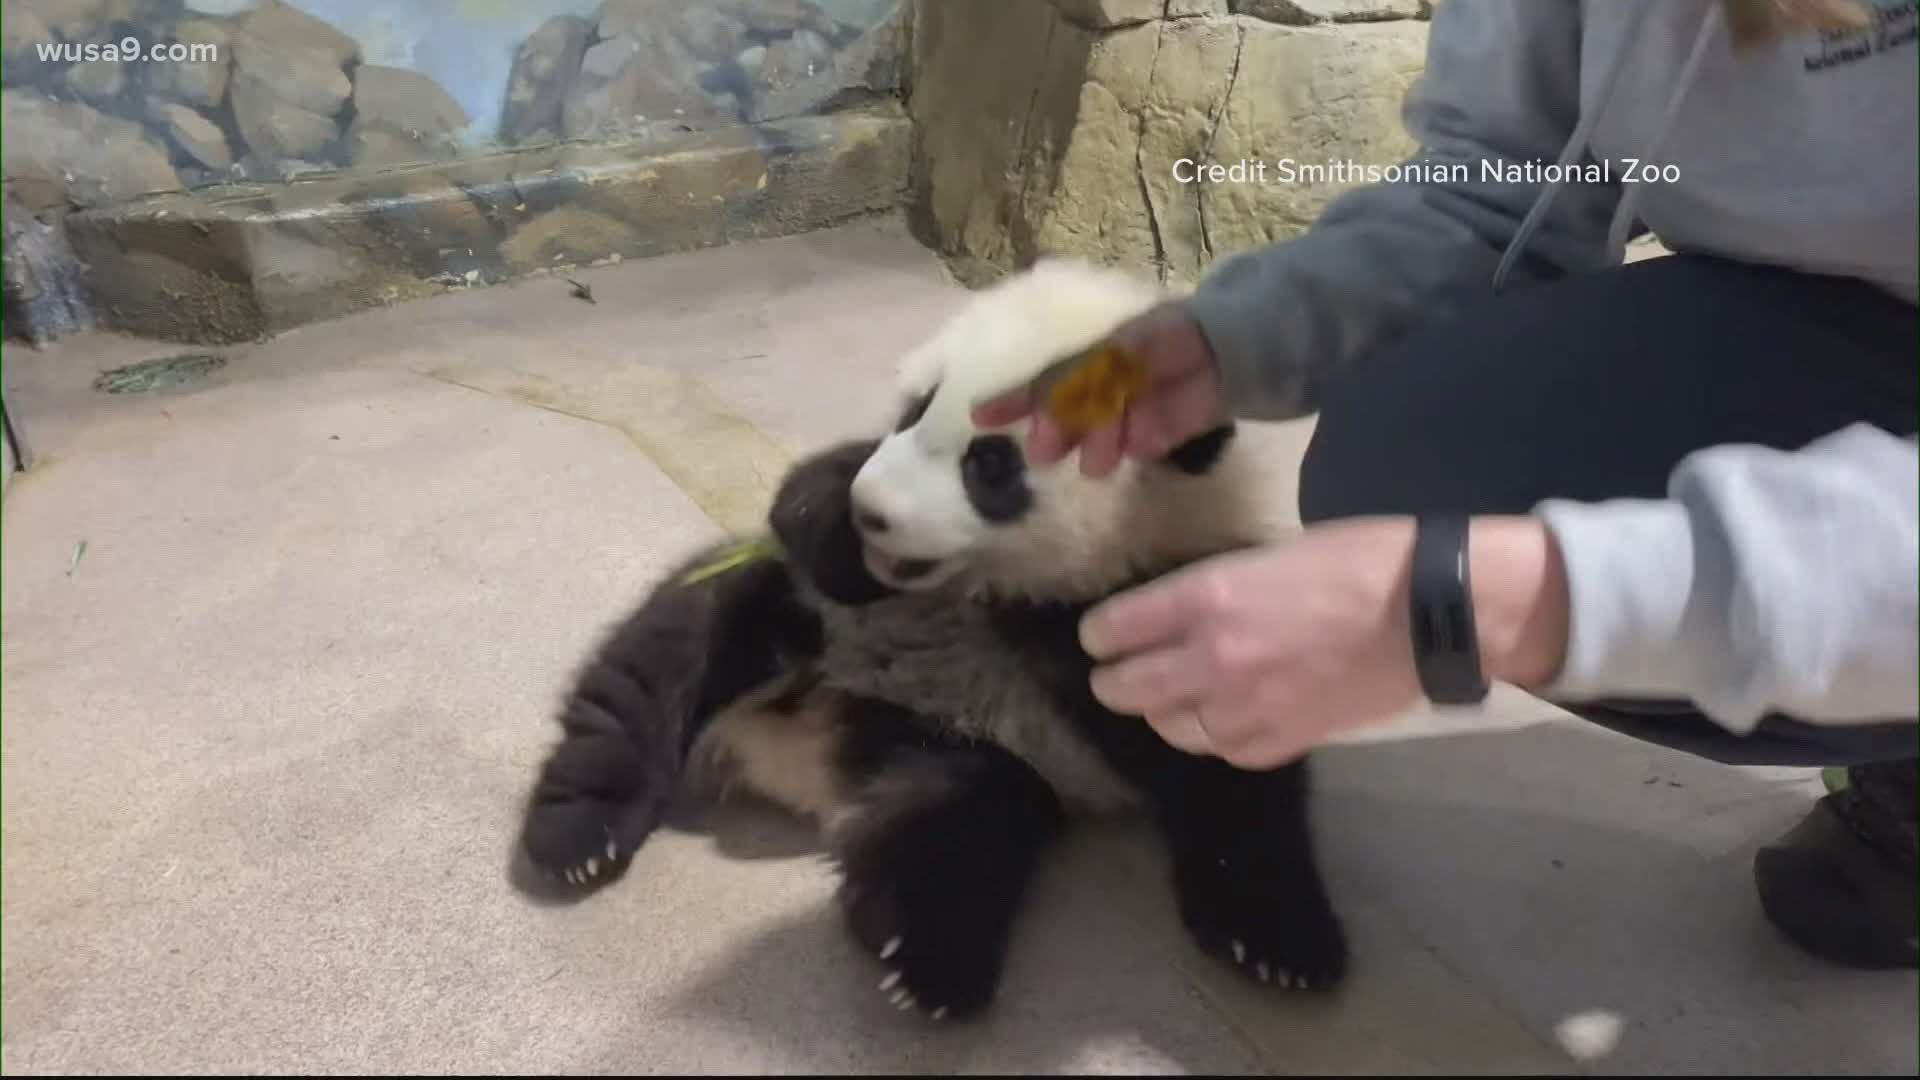 The National Zoo's newest star is ready for his closeup.